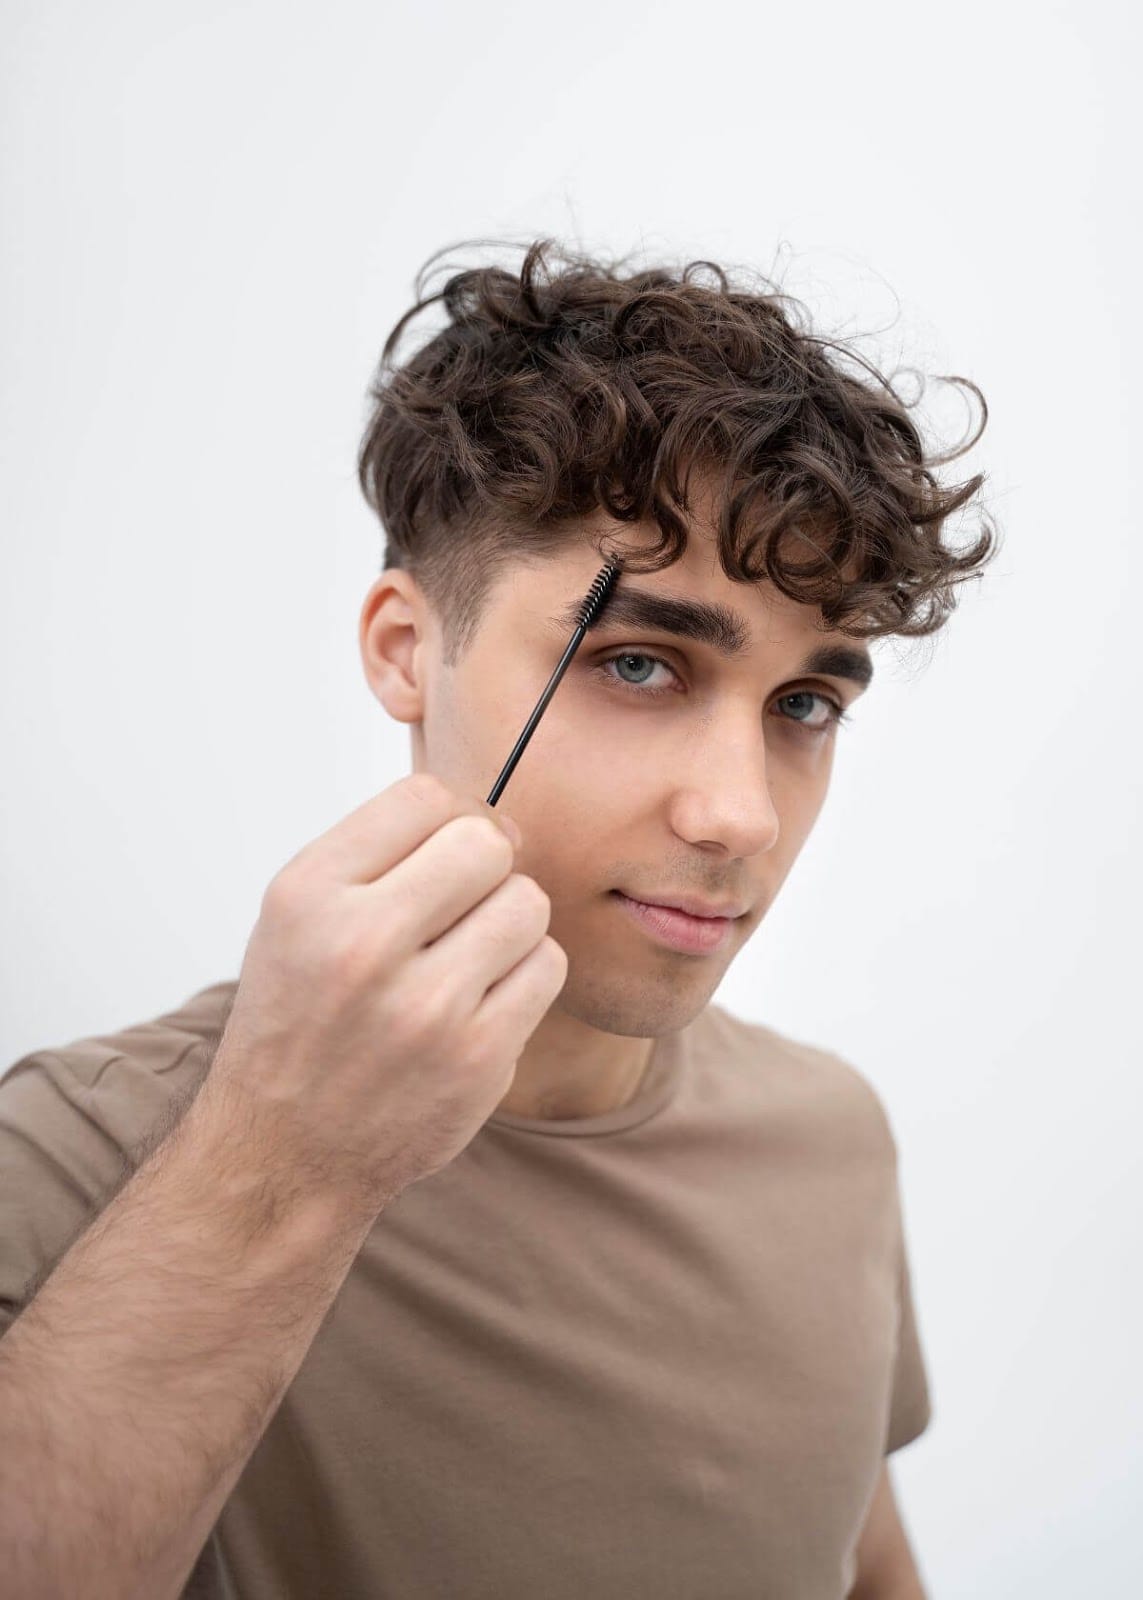 How Do Mens Shape Their Eyebrows with Eyebrows Trimmer?